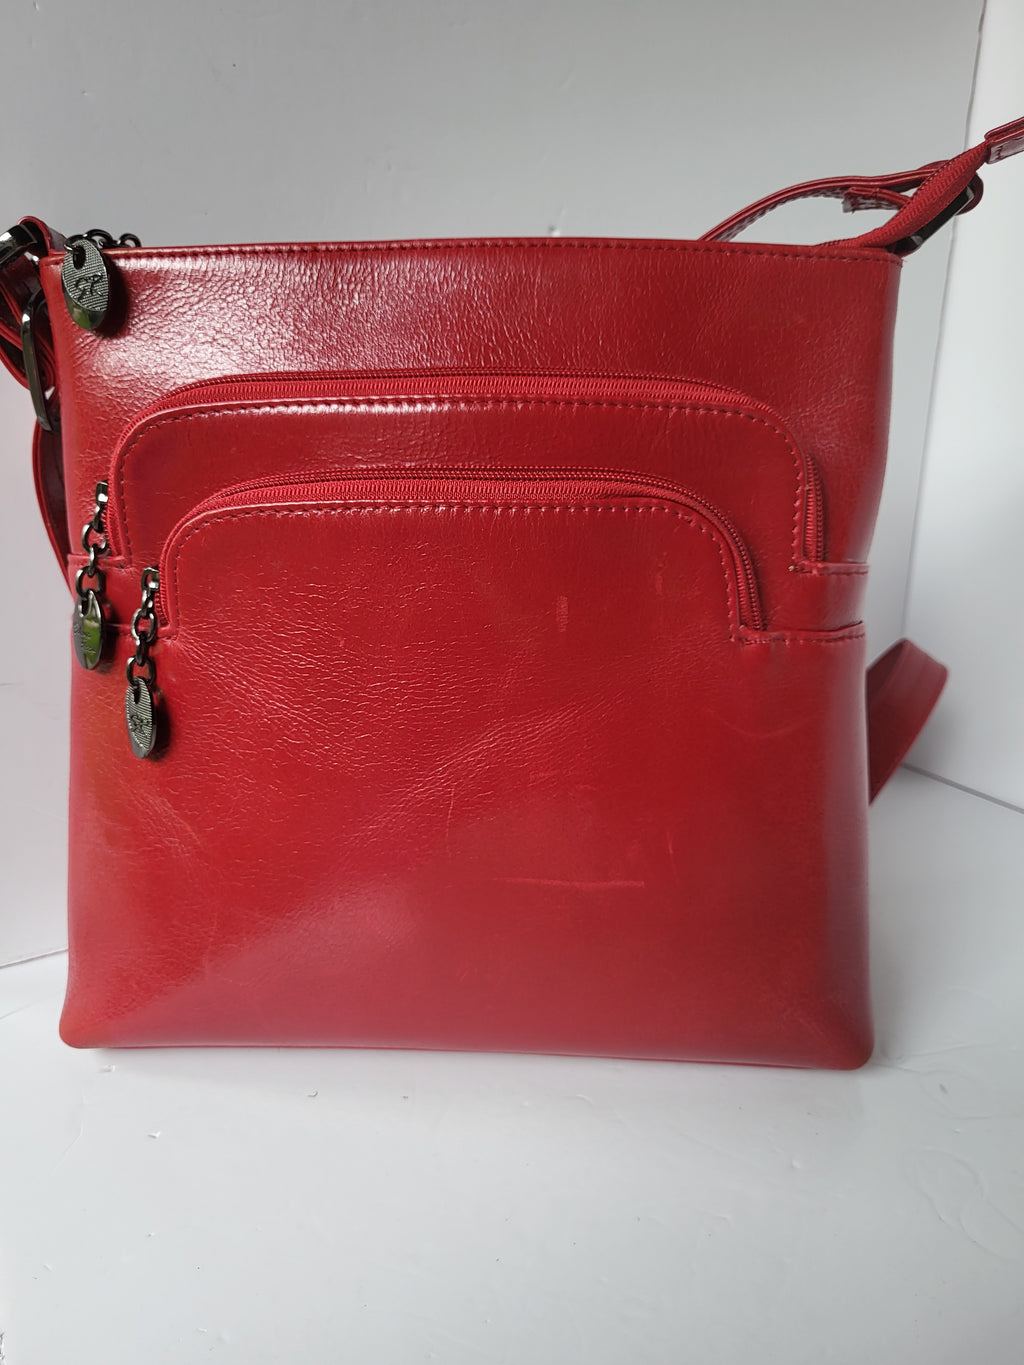 Red Leather Multi Compartment Shoulder/Crossbody Bag